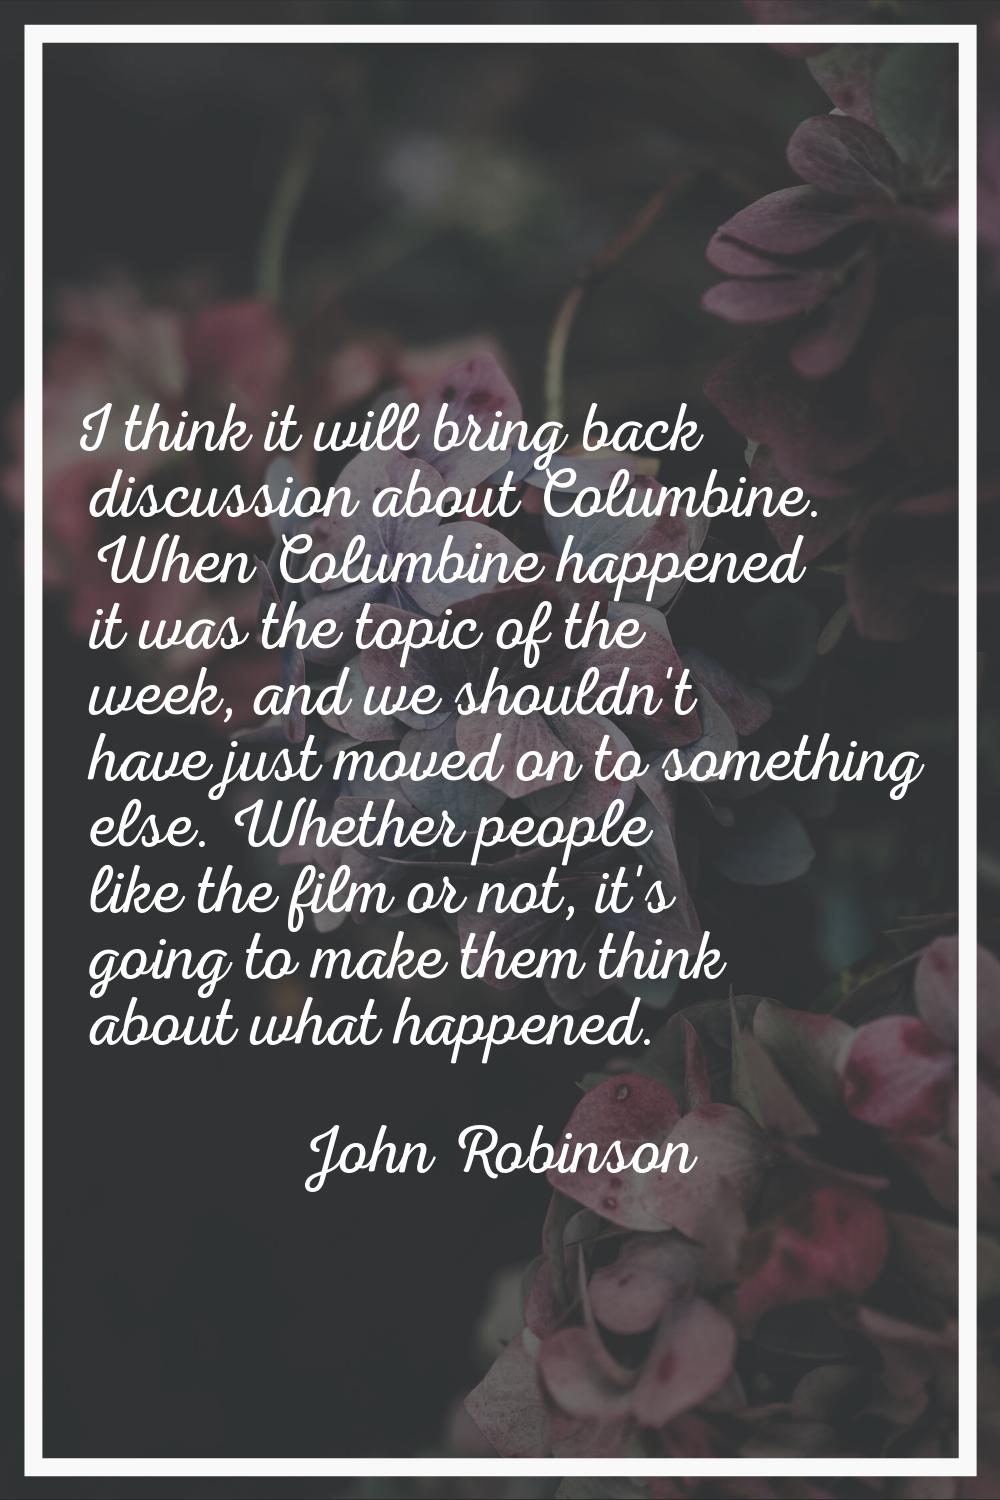 I think it will bring back discussion about Columbine. When Columbine happened it was the topic of 